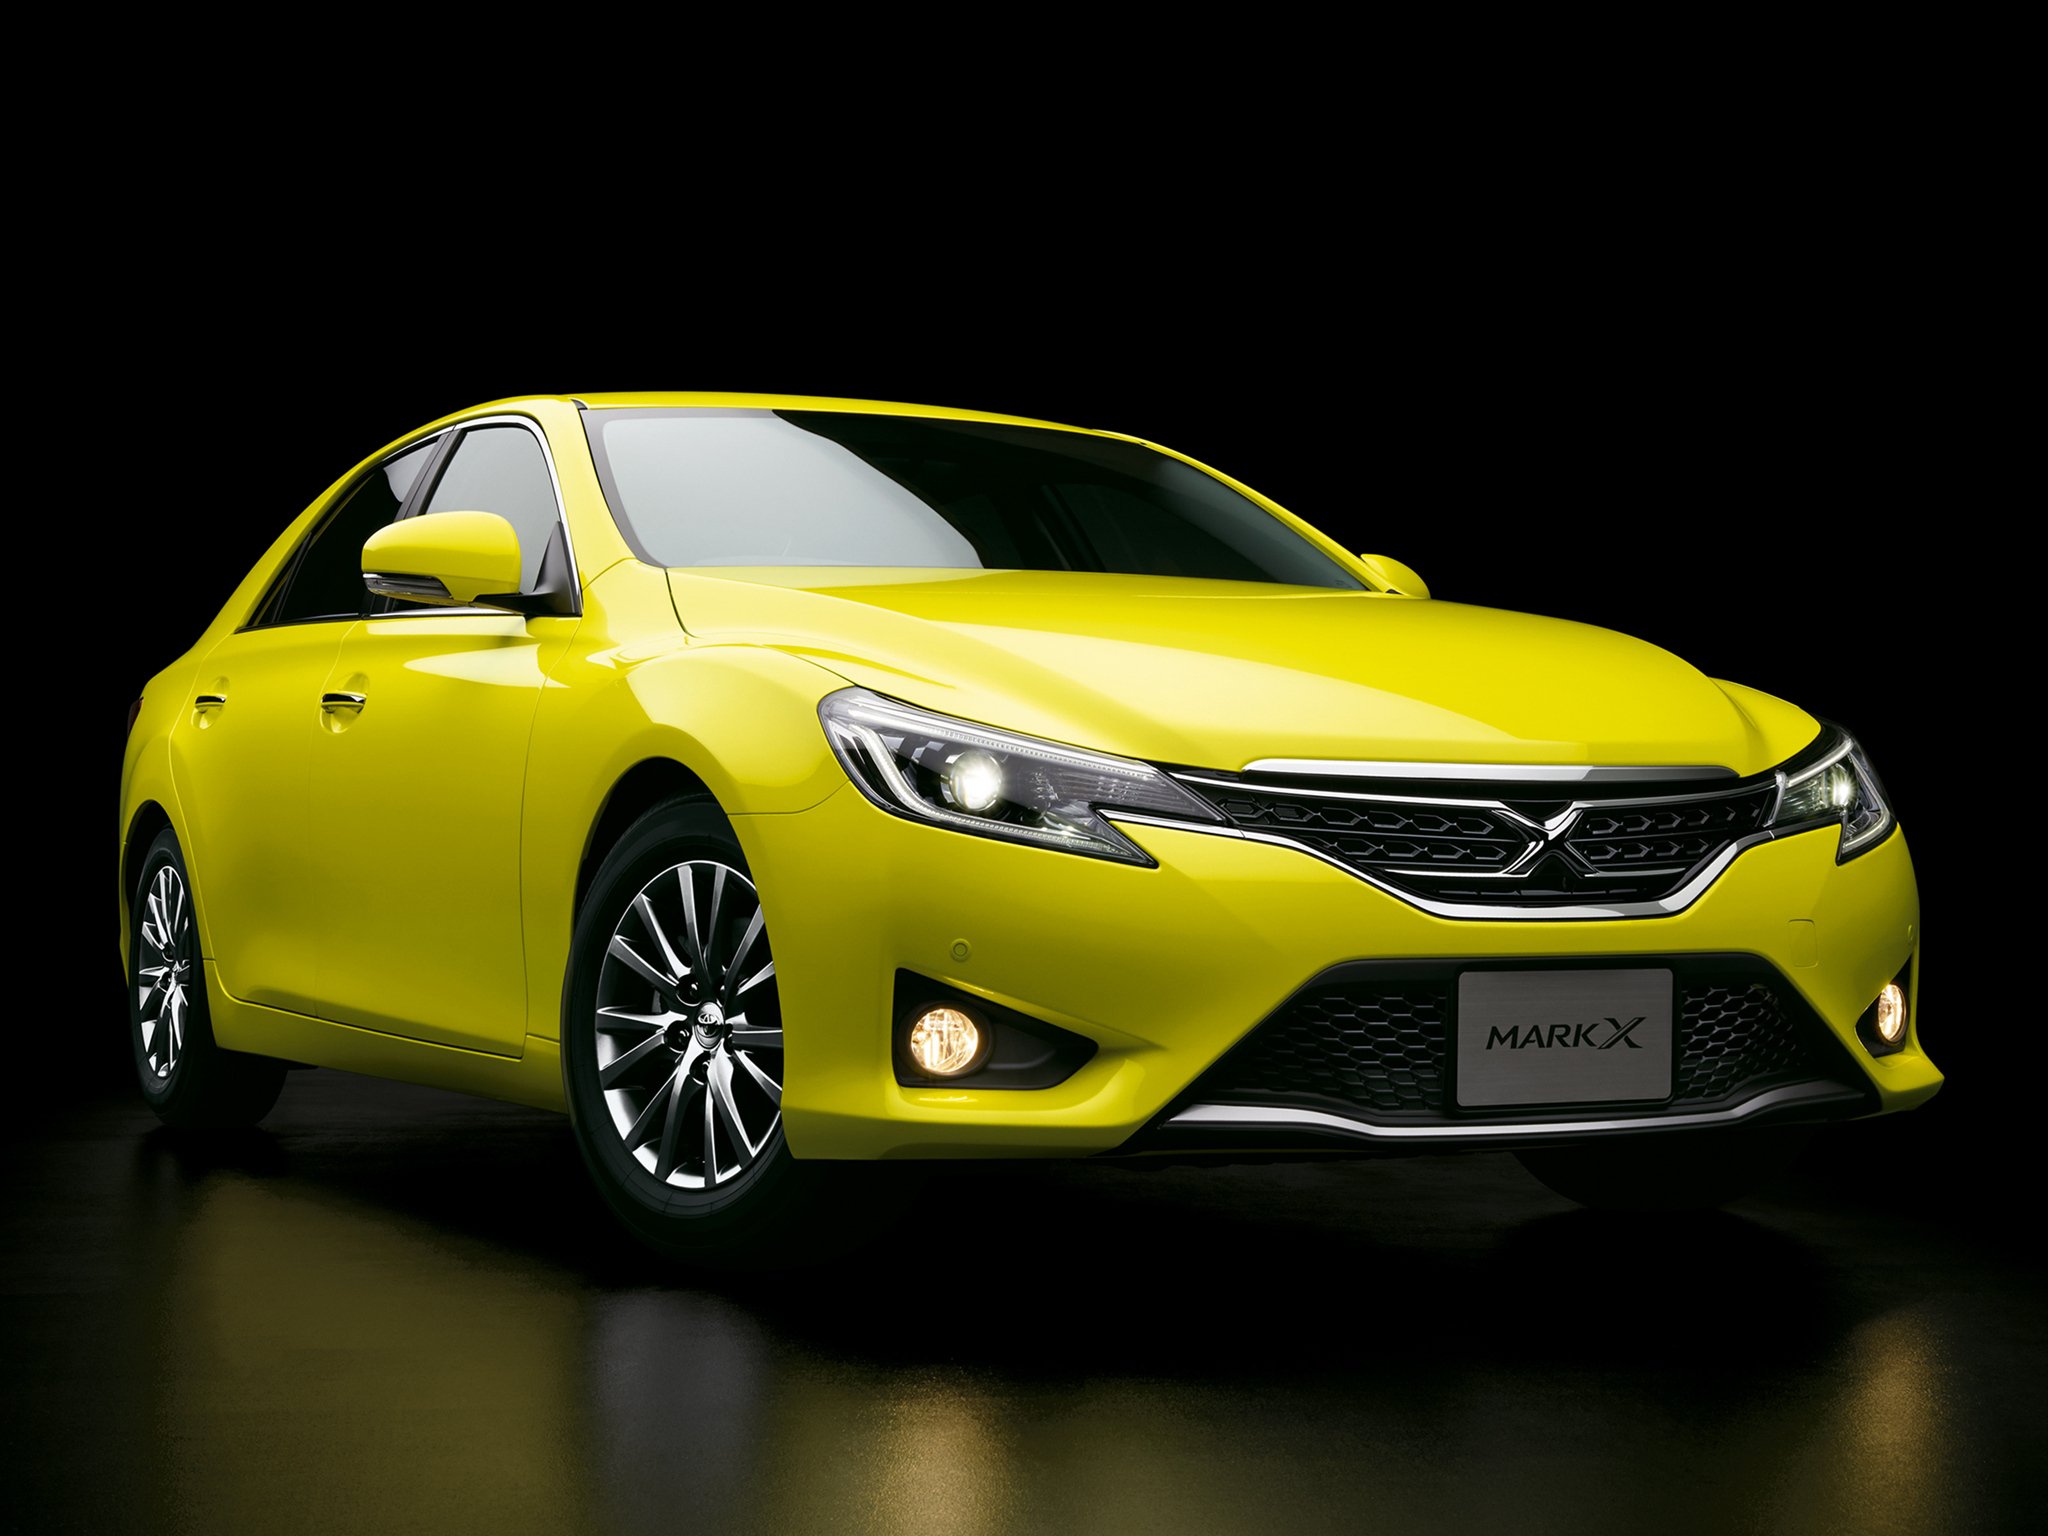 2014, Toyota, Mark x, 250g, S package, Yellow label,  grx130 Wallpaper